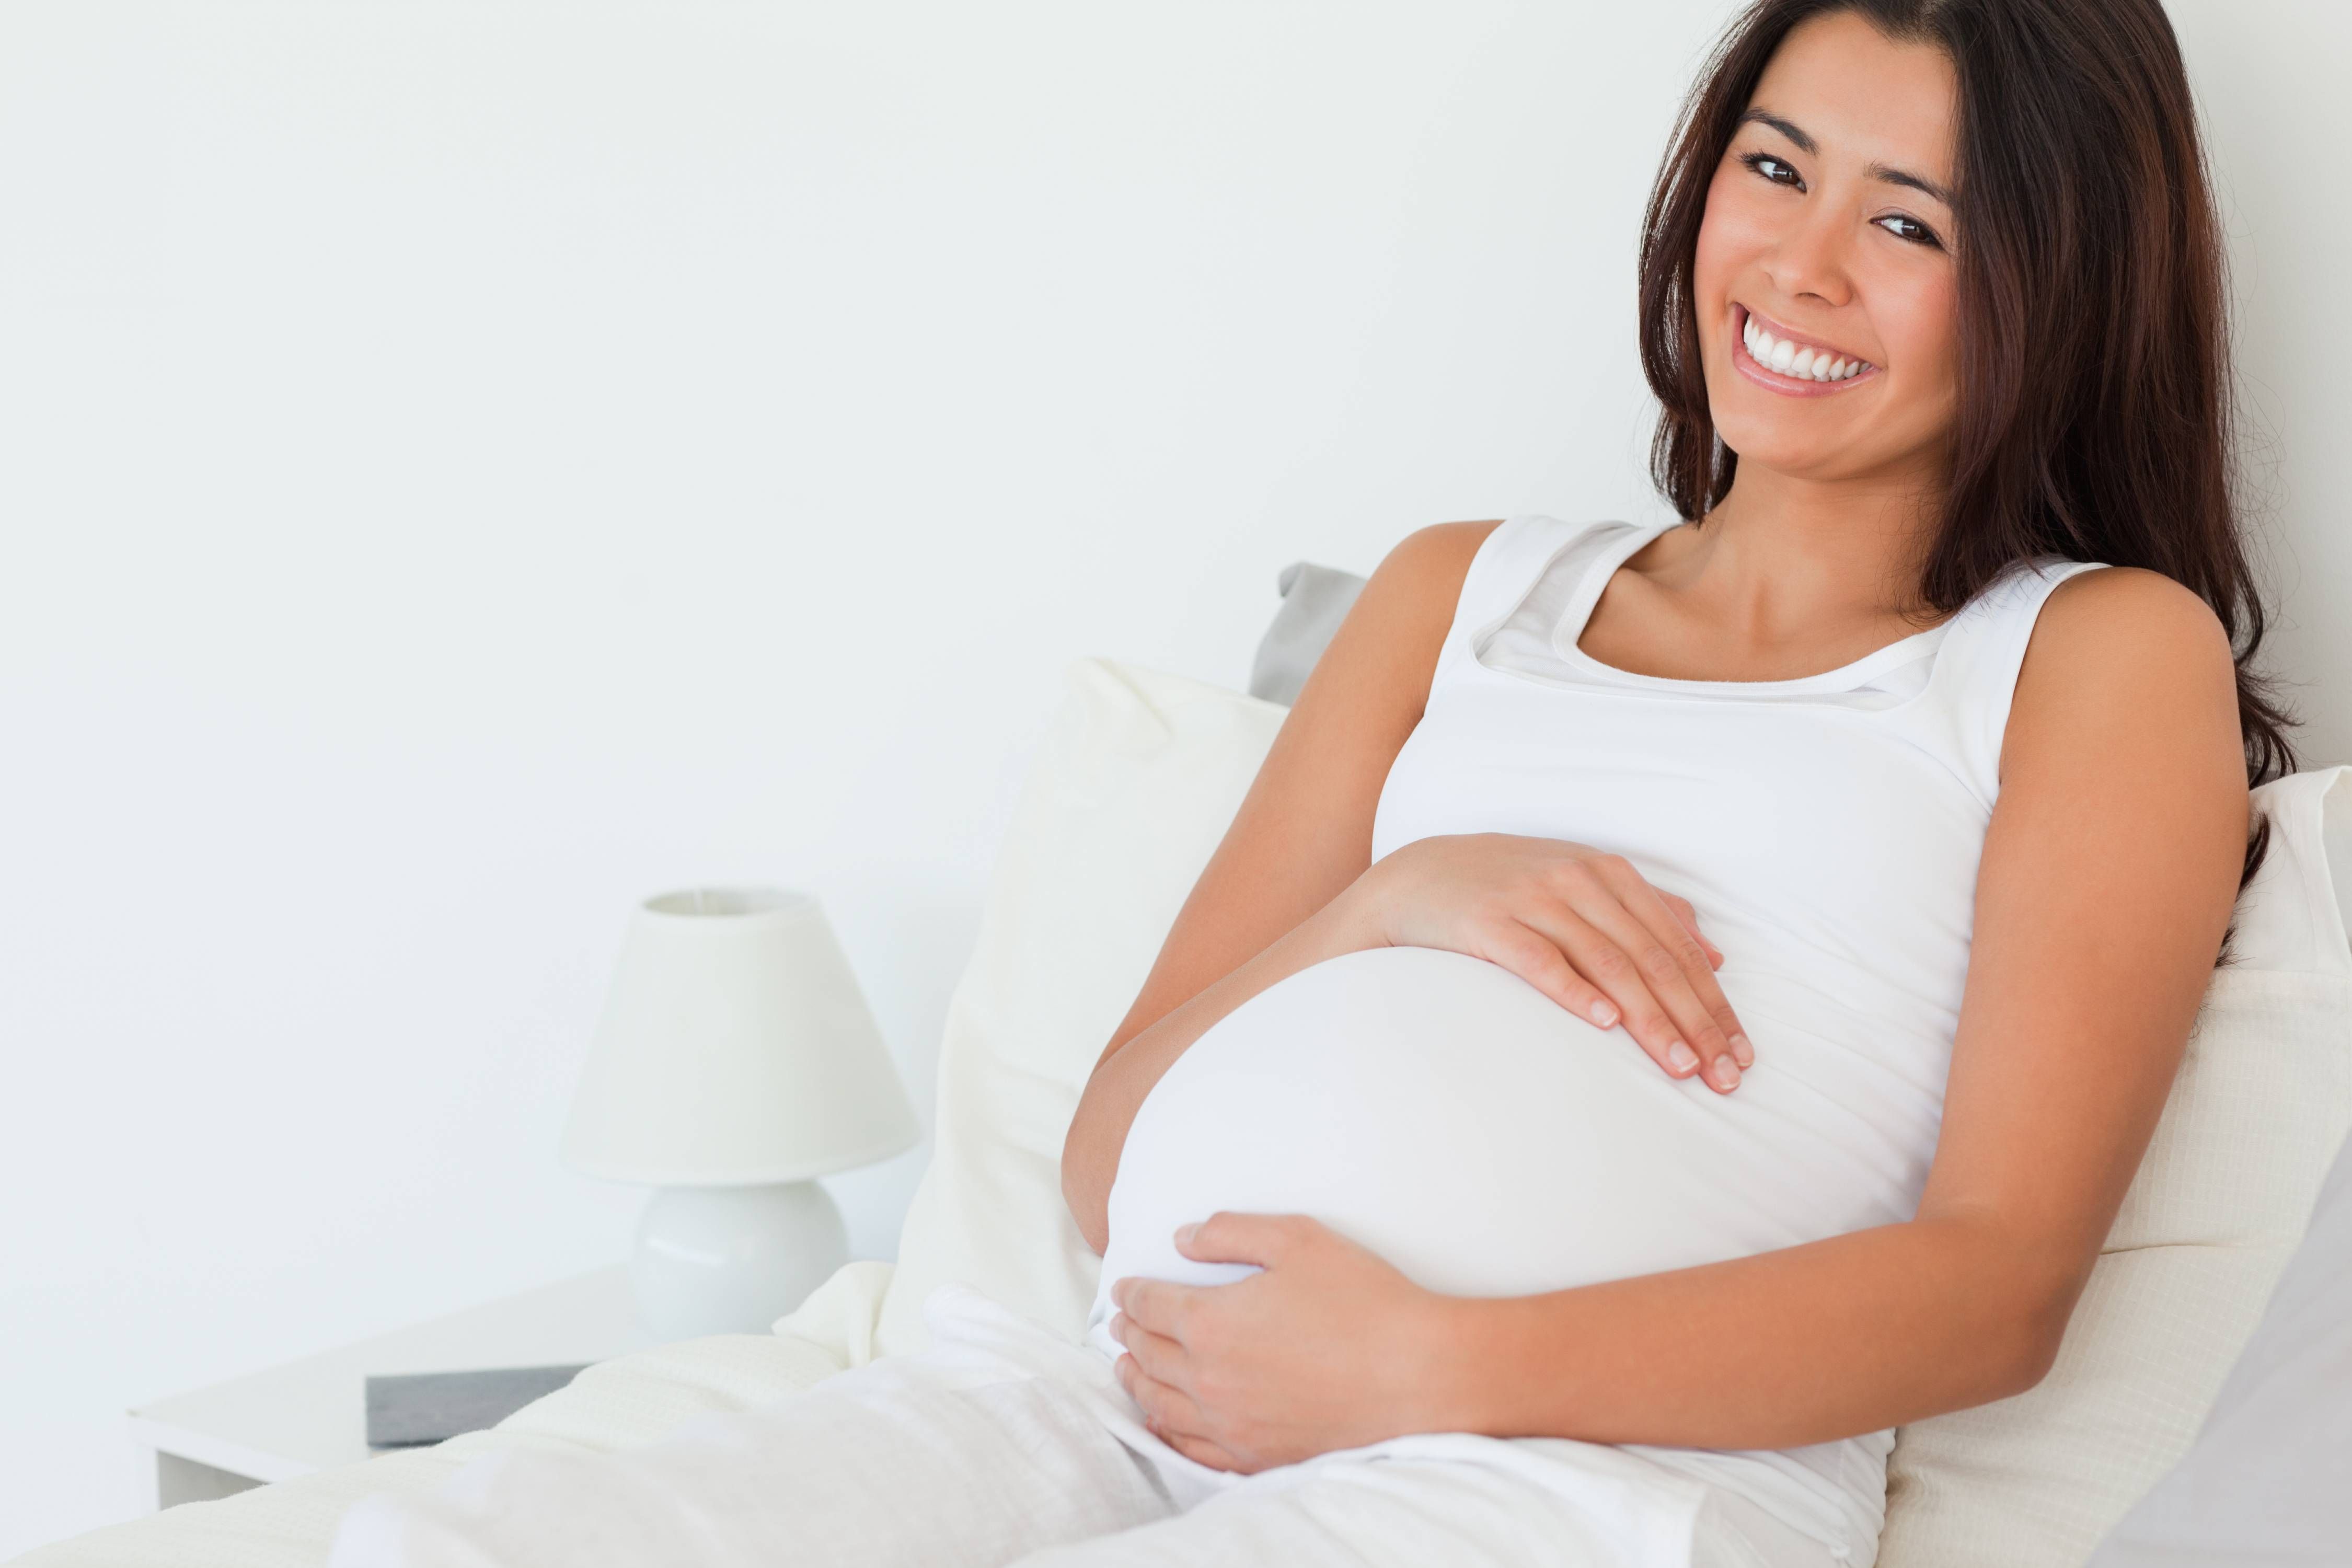 Benefits of Seeing an OBGYN Before Childbearing